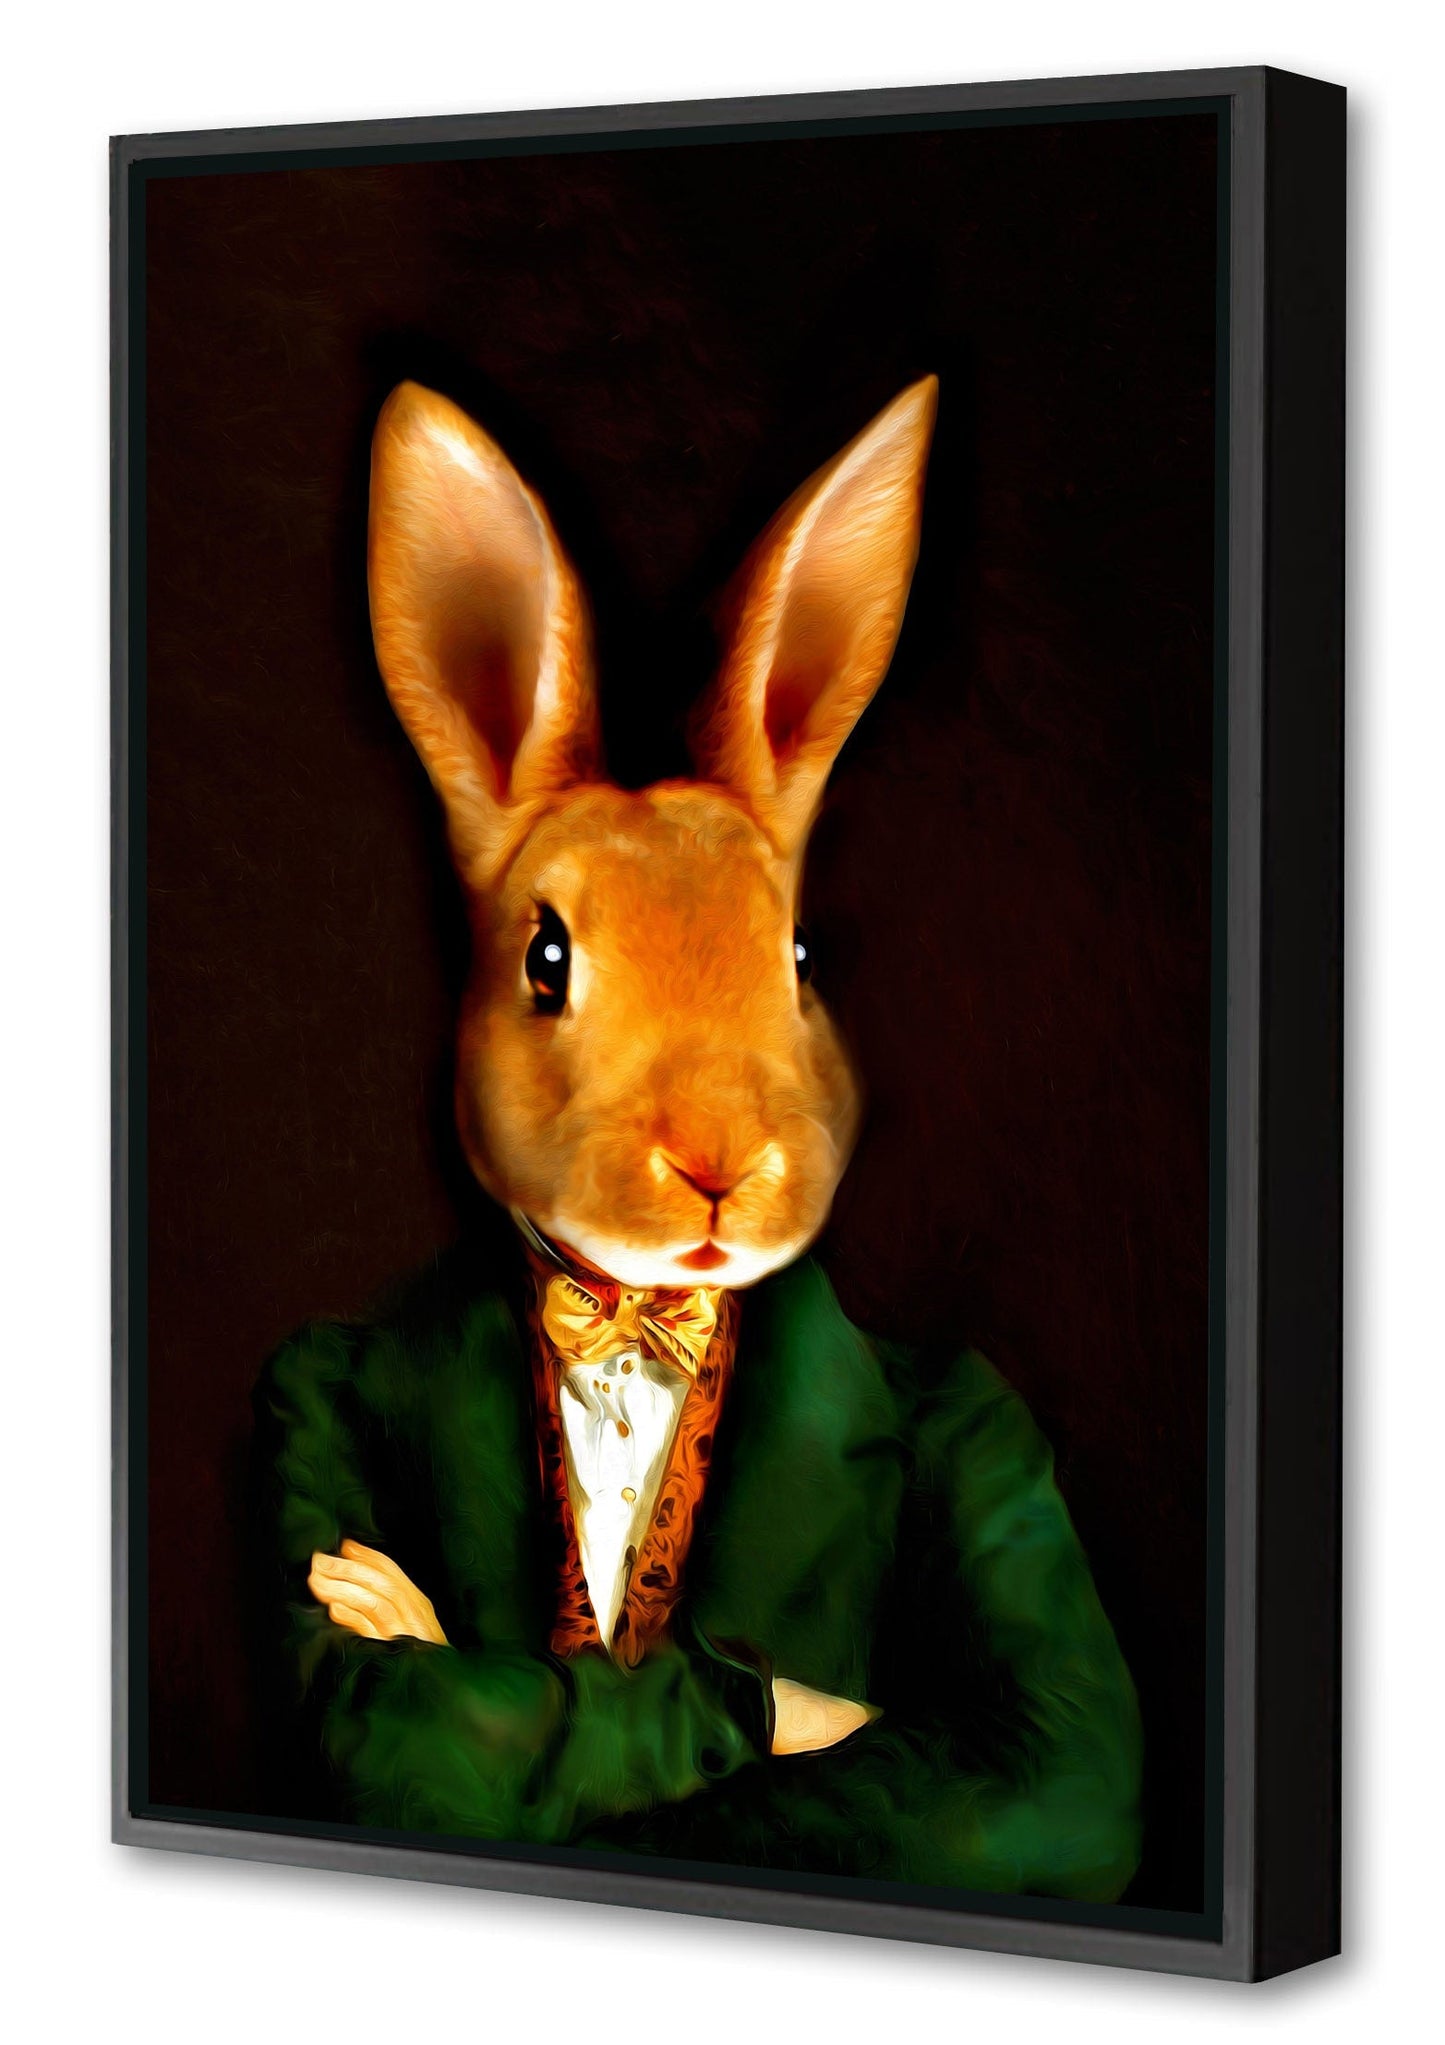 Buster-print, tein-lucasson-Canvas Print with Box Frame-40 x 60 cm-BLUE SHAKER